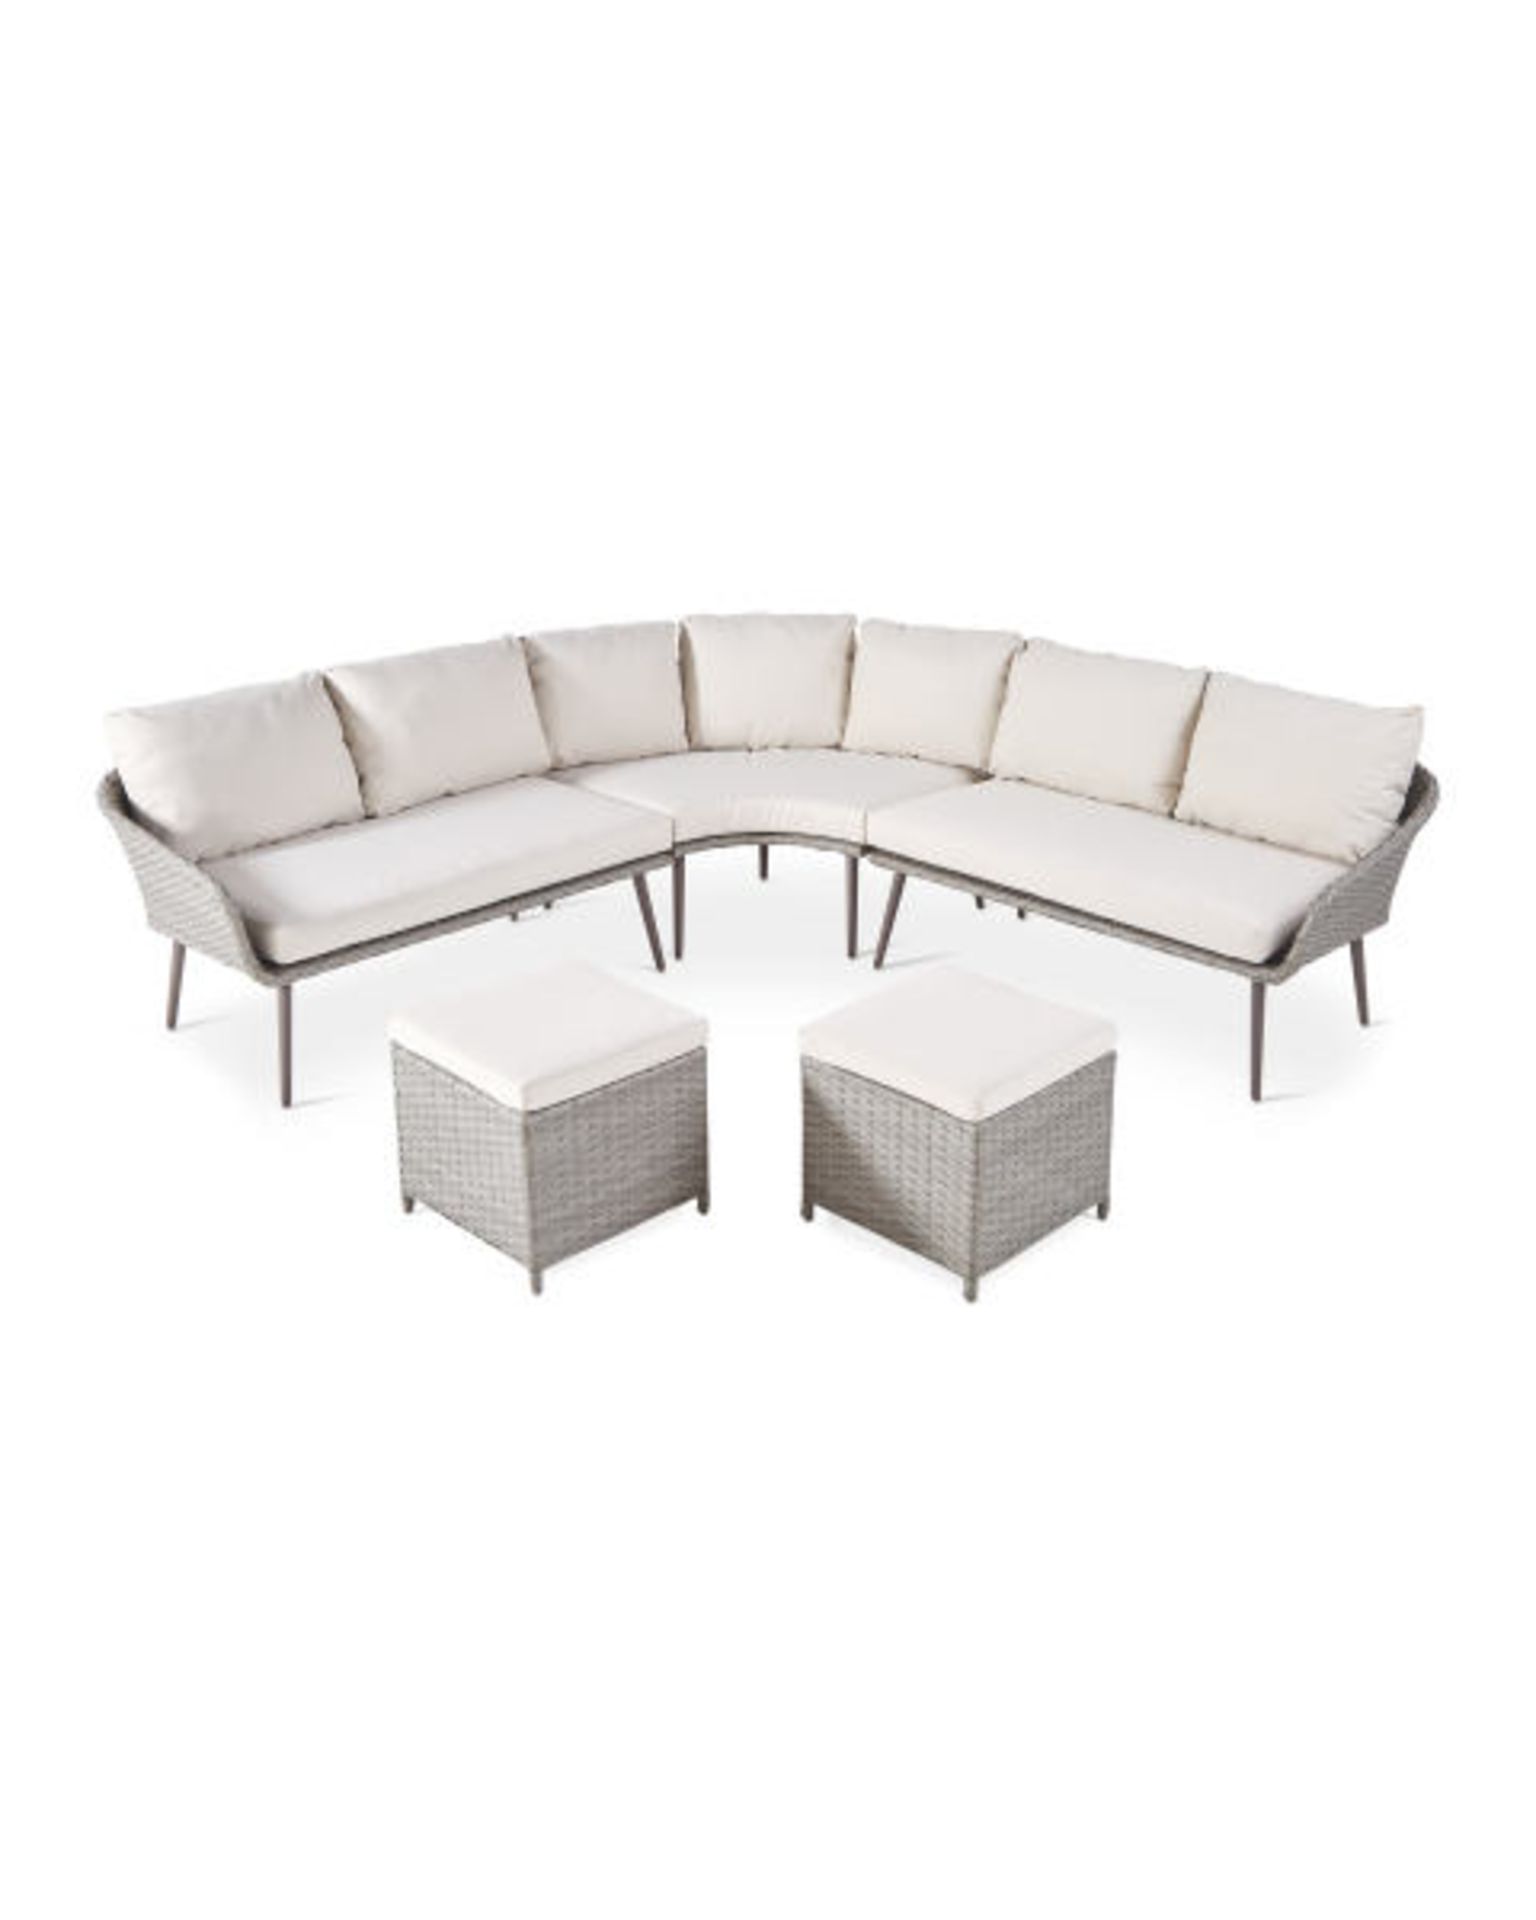 Multifunctional Lounge & Dining Corner Sofa Dining Set. Enjoy the warmer weather with this Luxury - Image 3 of 5